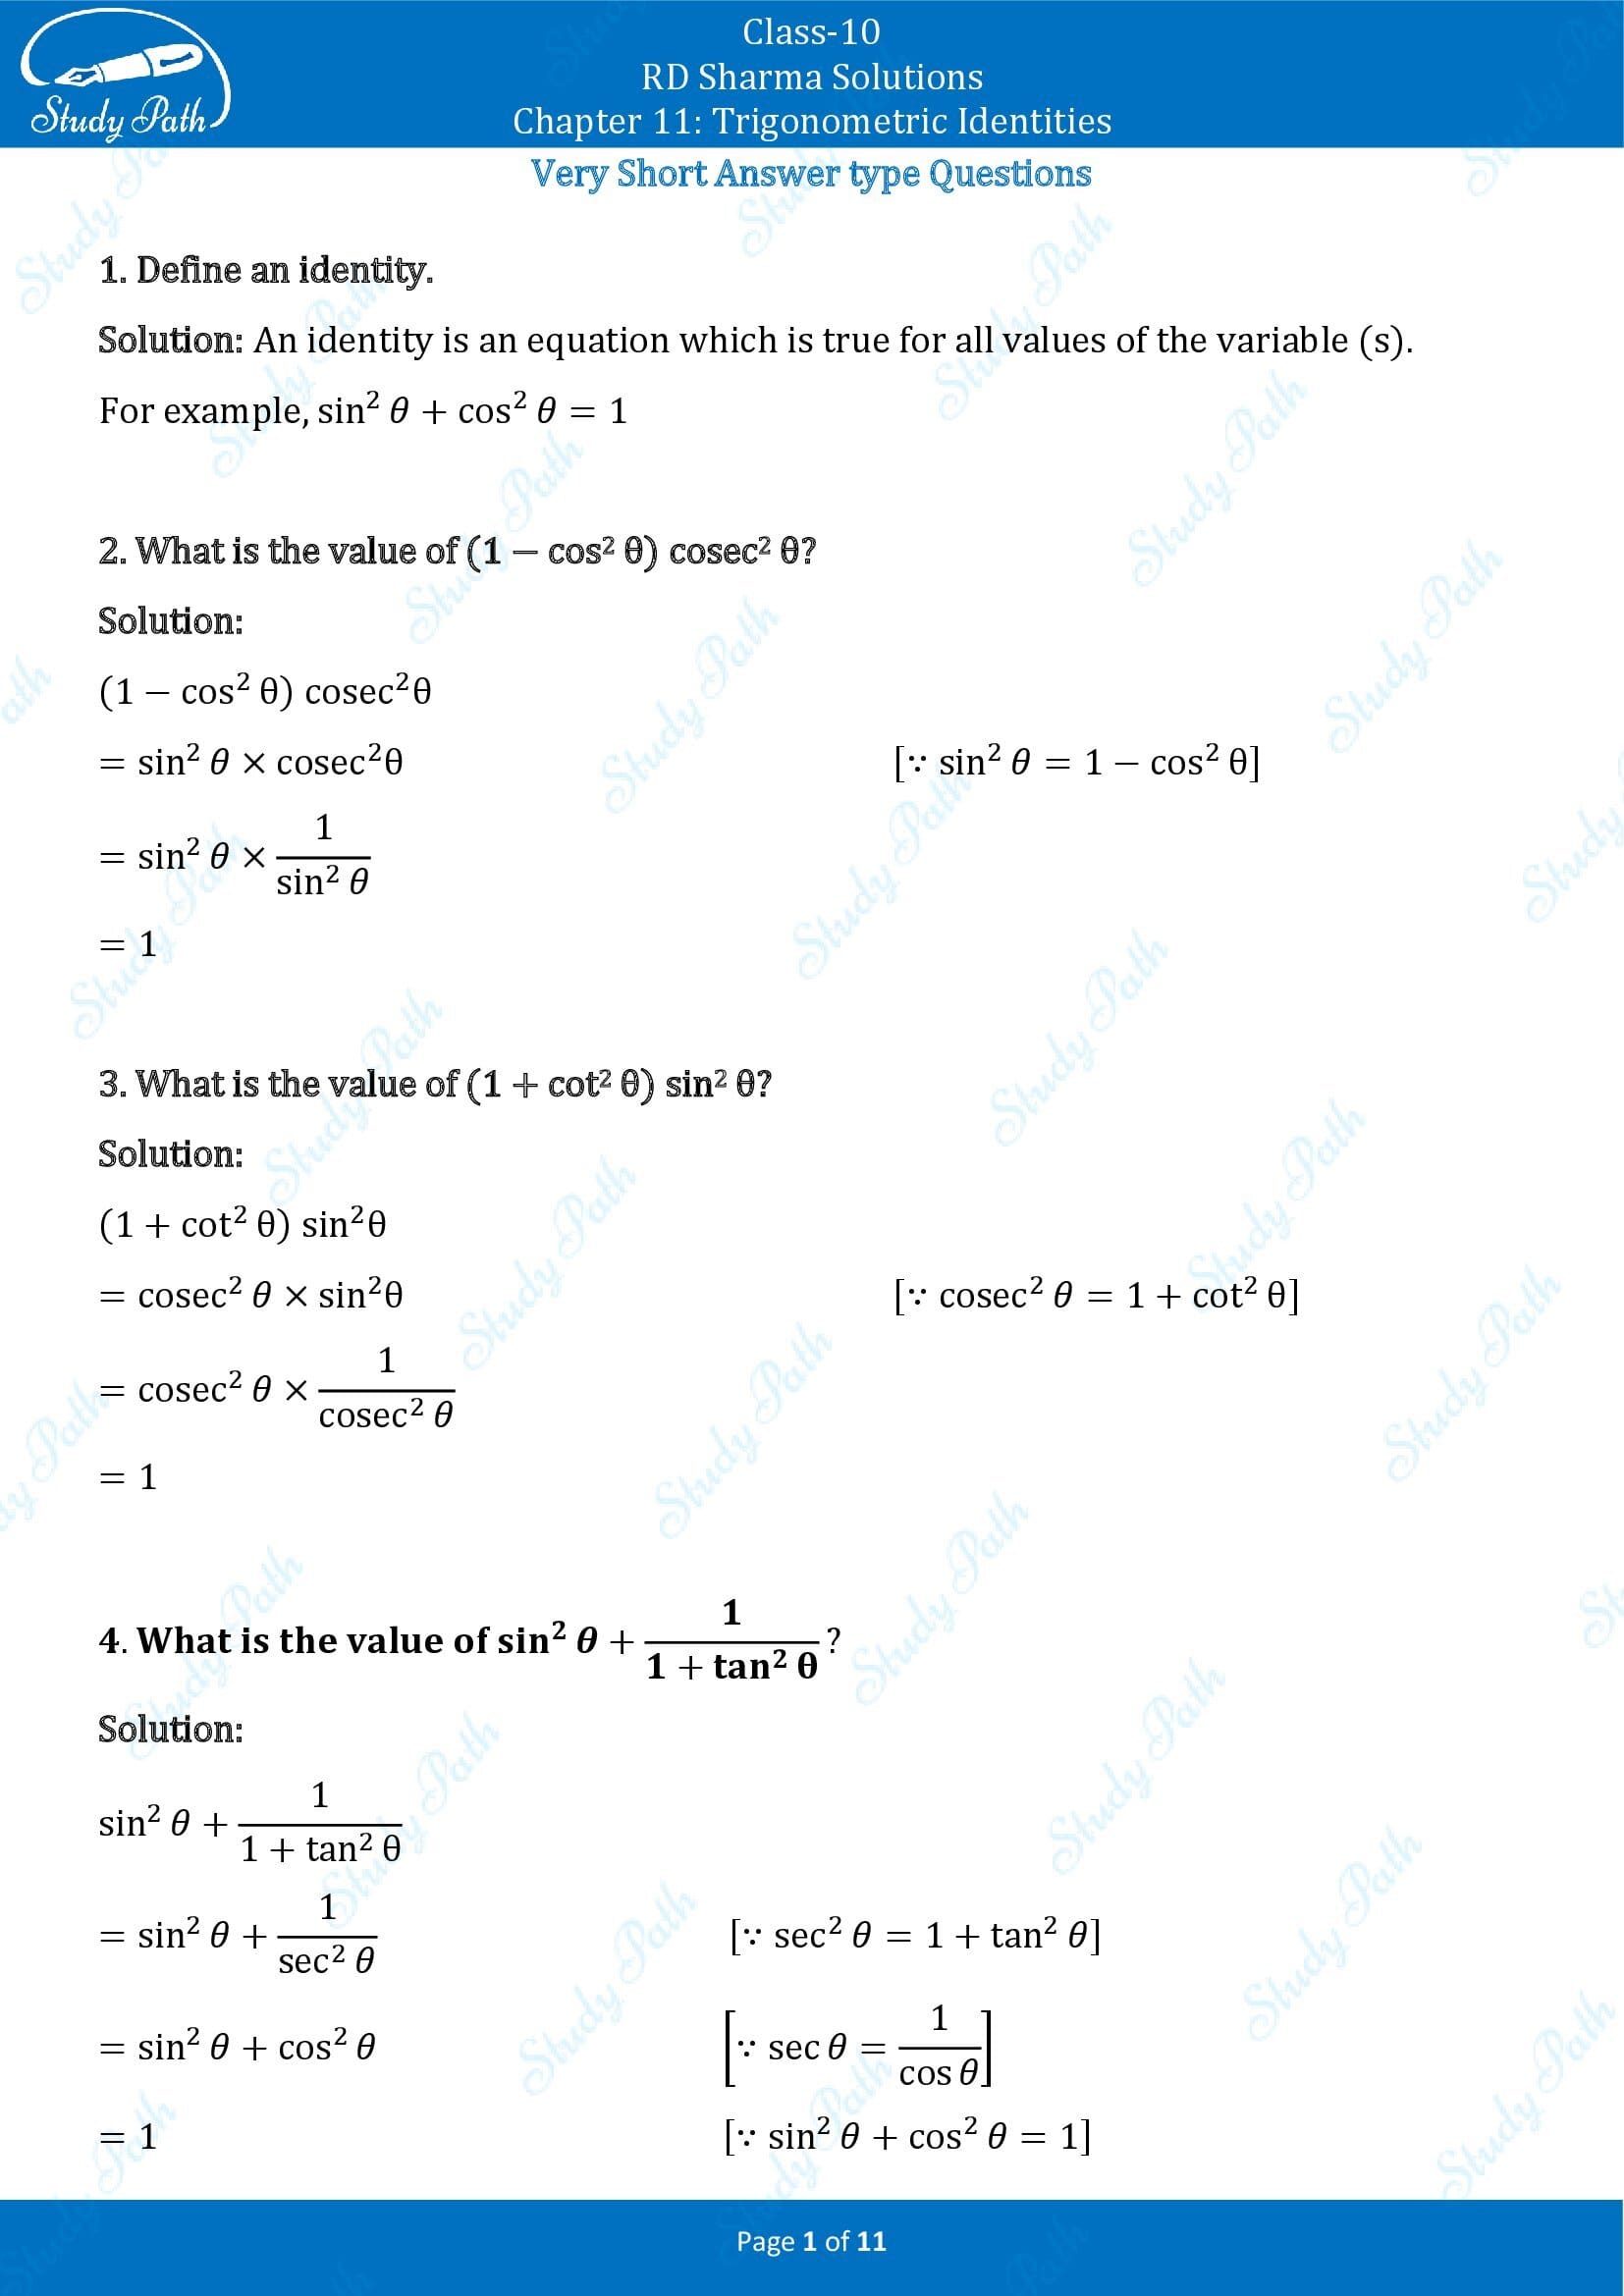 RD Sharma Solutions Class 10 Chapter 11 Trigonometric Identities Very Short Answer Type Questions VSAQs 00001